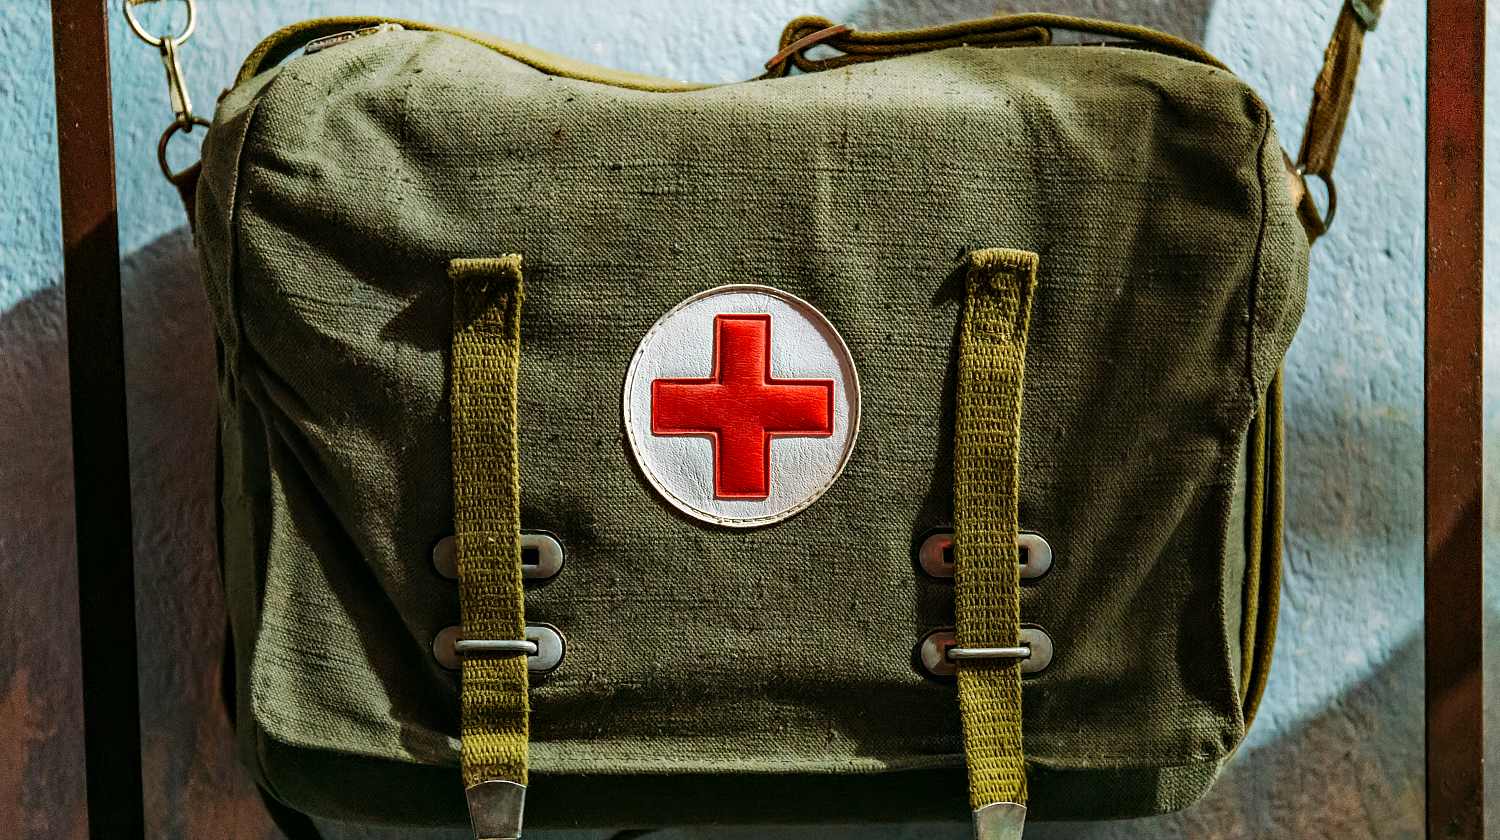 Feature | Vintage Soviet military medical bag with red cross, ancient emergency equipment | Do You Keep A Combat Casualty Kit In Your Go Bag?